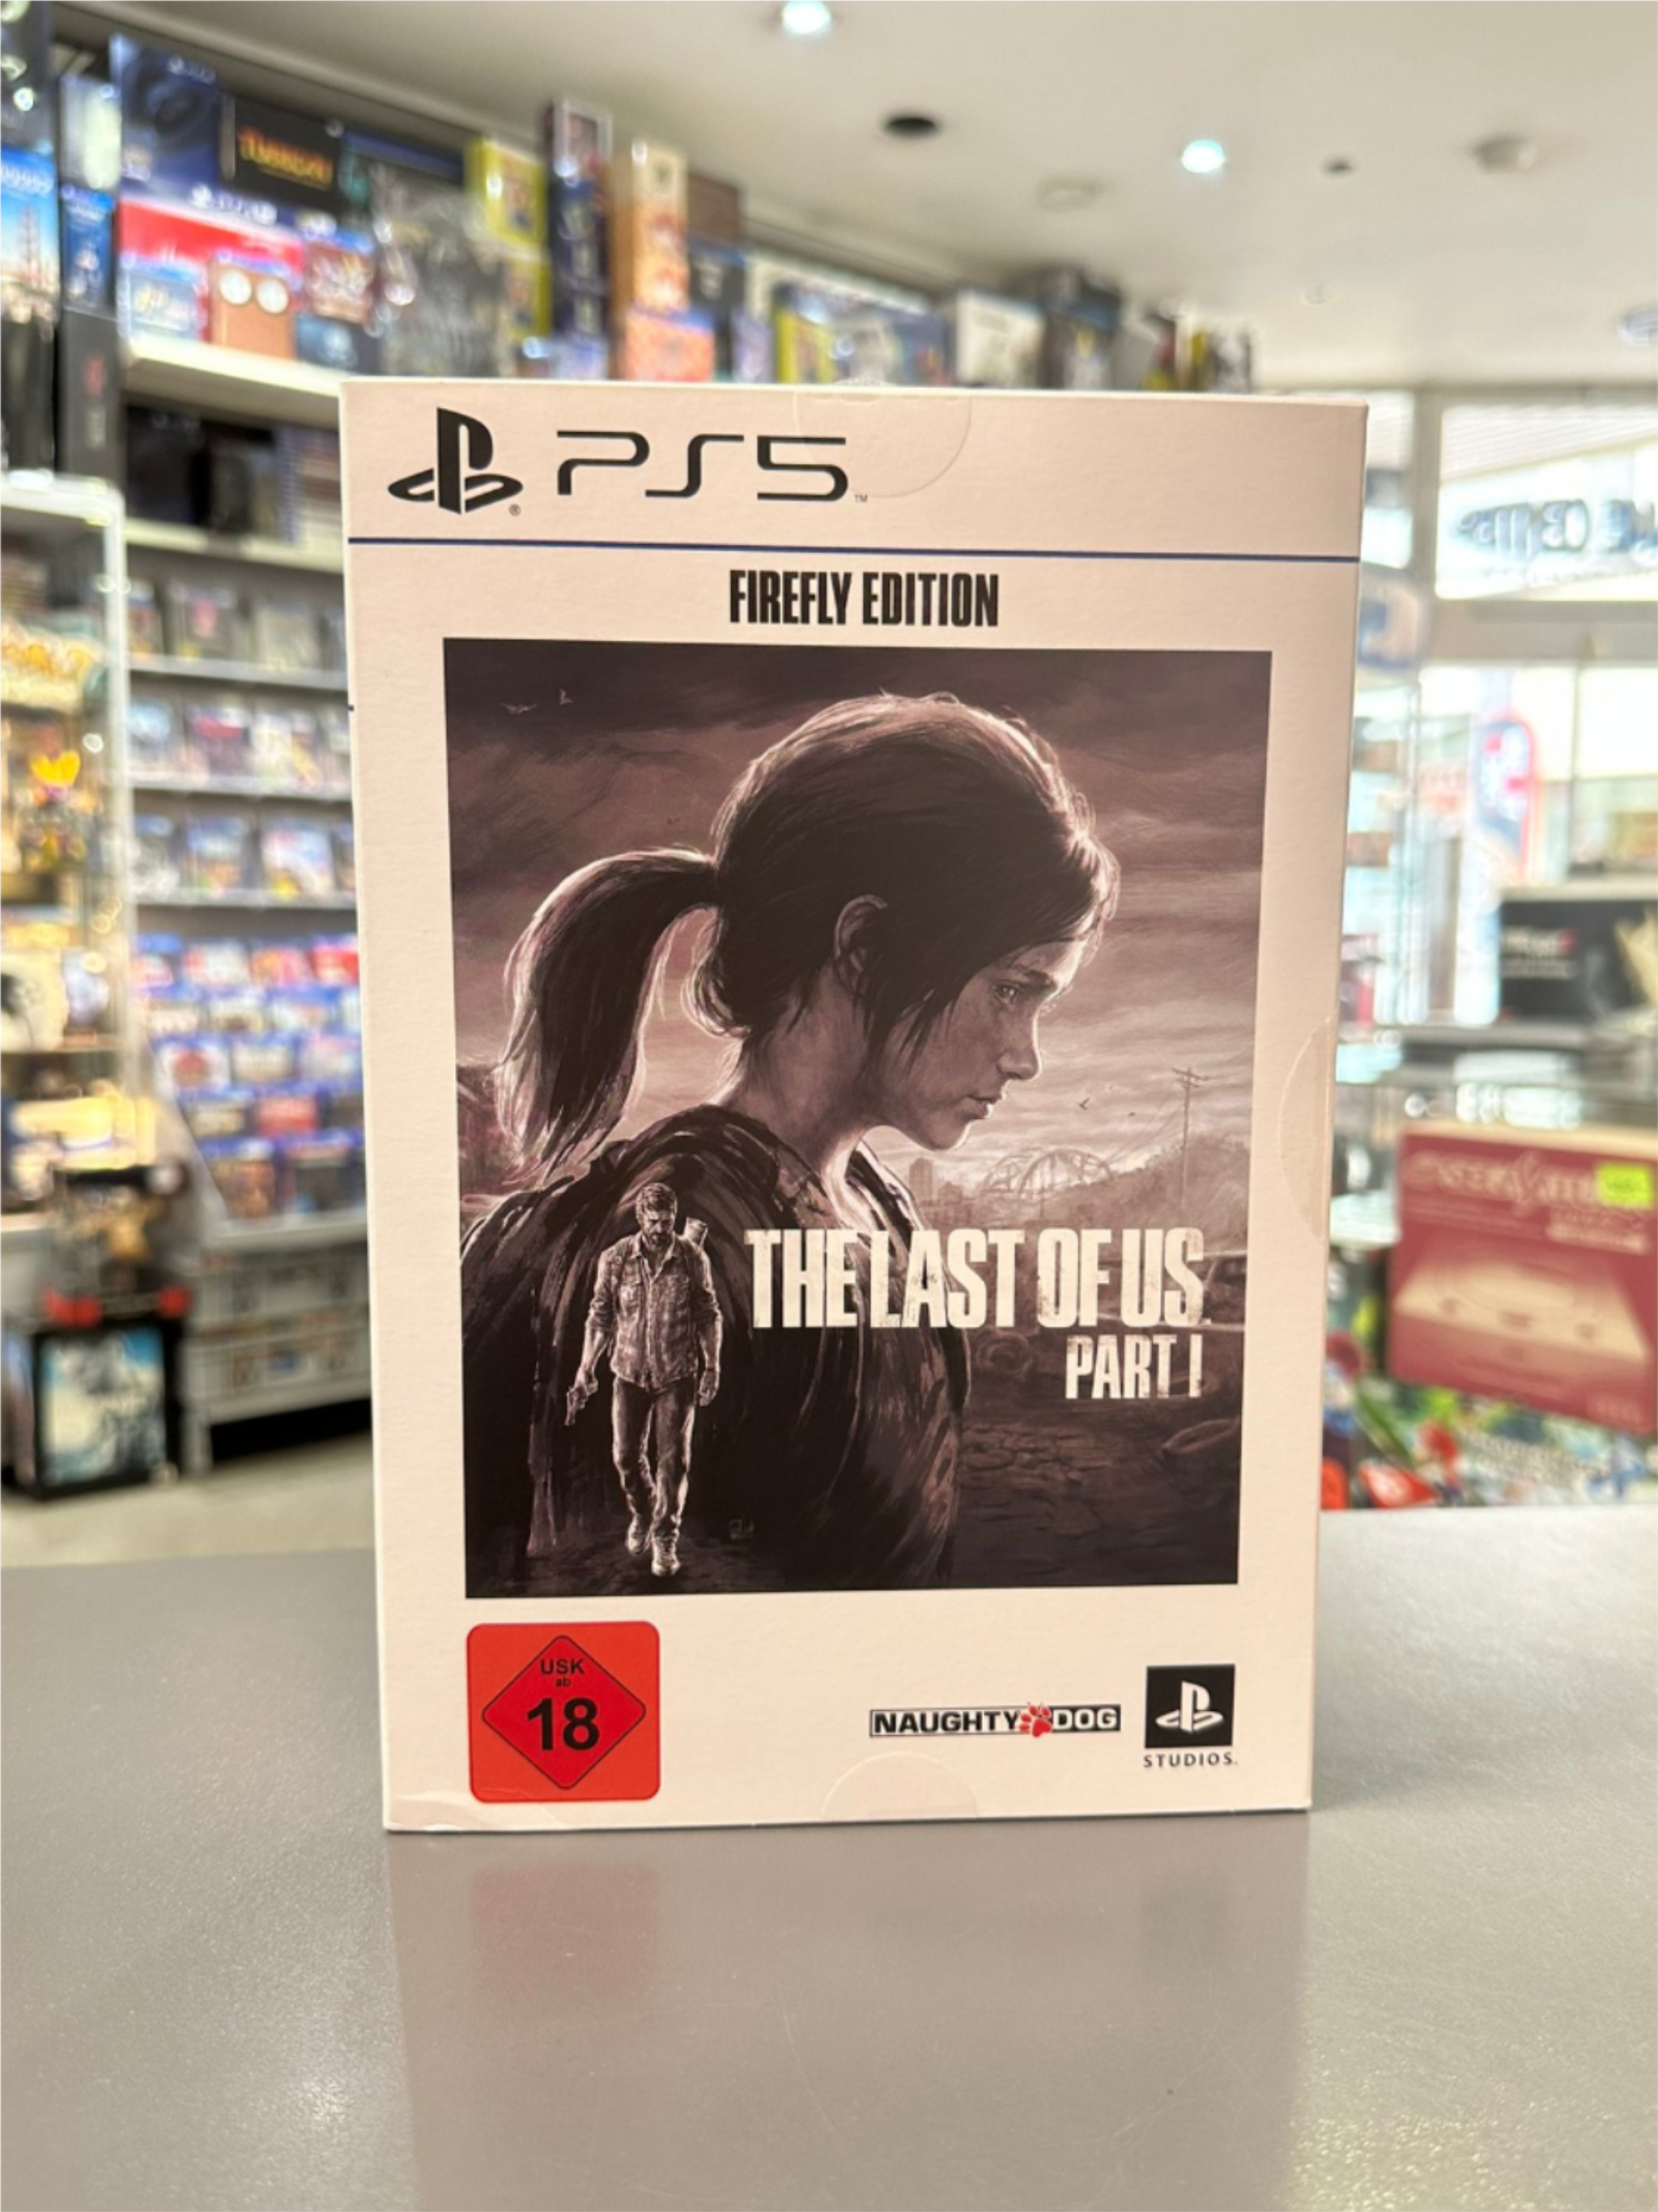 The Last Of Us Part 1 Firefly Edition PS5